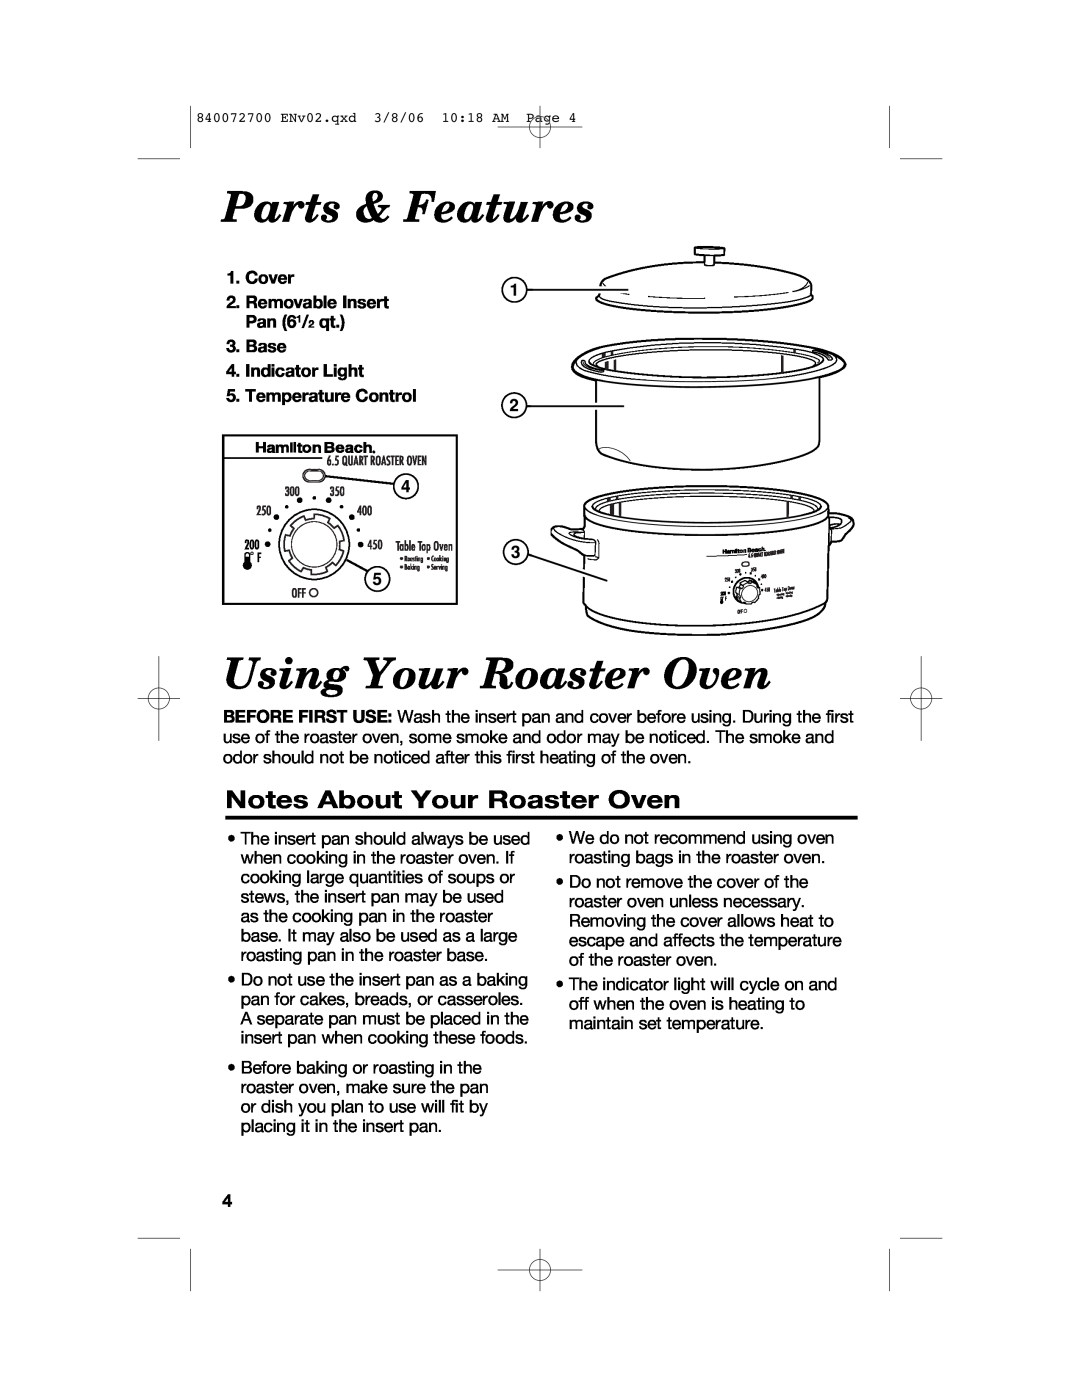 Hamilton Beach 32600s manual Parts & Features, Using Your Roaster Oven, Notes About Your Roaster Oven 